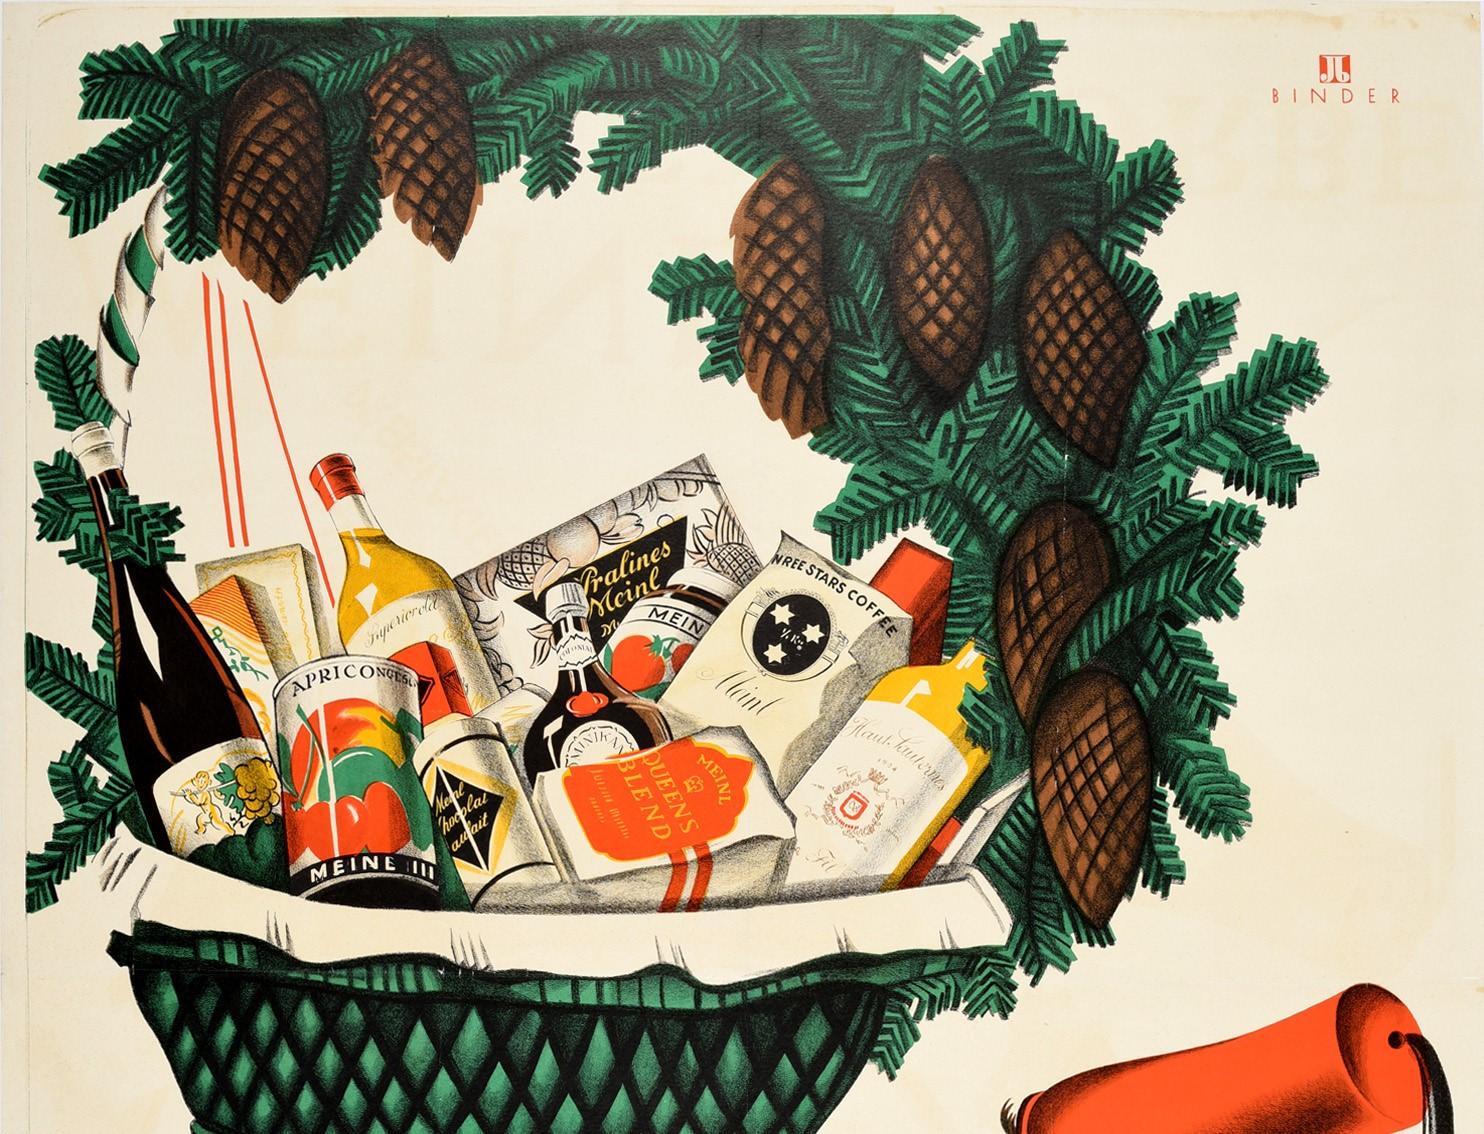 Original vintage advertising poster Meinl gift baskets / Meinl Geschenkkorbe featuring a great design depicting a person holding up a green hamper basket of food and drink including pralines, tea and coffee, wine and tinned fruit with pine cones and